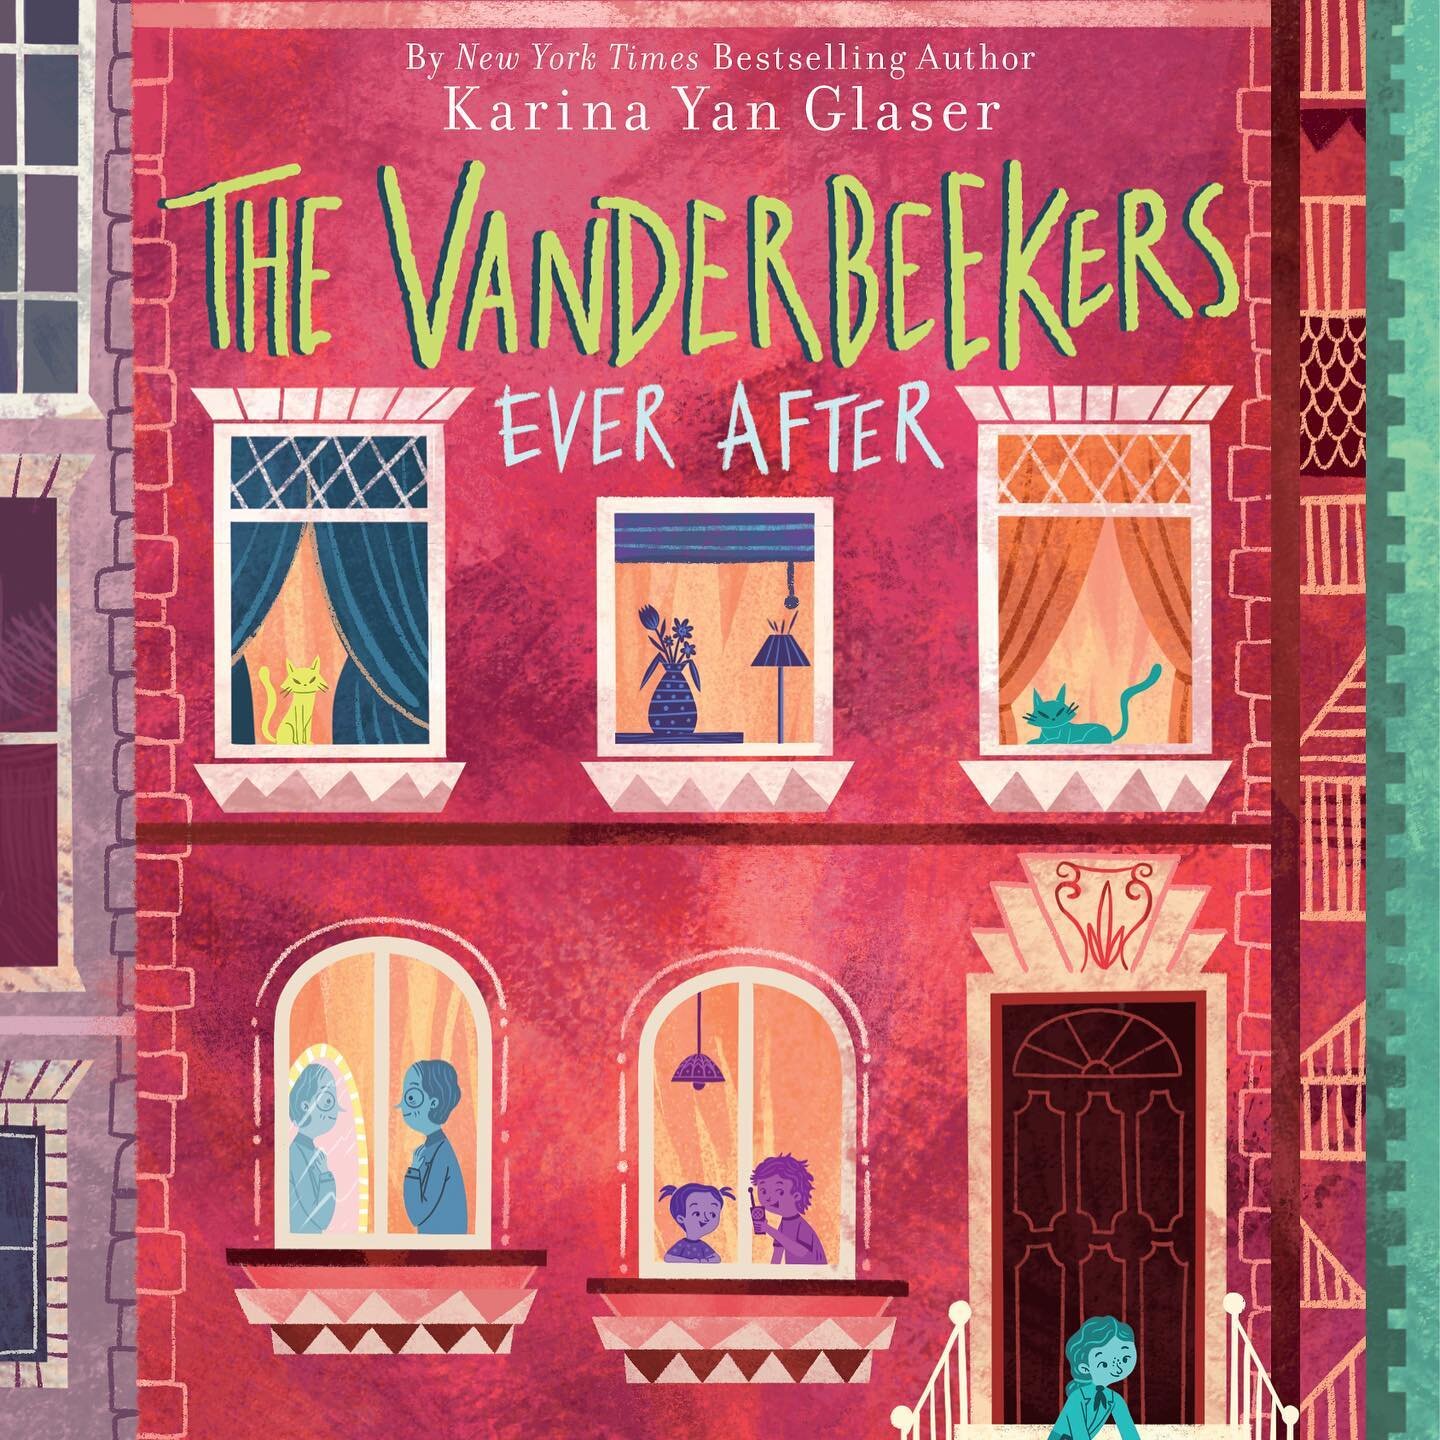 ✨Cover Reveal Day!✨ Here it is, the final book cover in the Vanderbeekers series! The jacket art is by the supremely talented and lovely @katyalonghiillustrator with gorgeous book design by Julia Tyler at @harperkids. Huge thanks to my fantastic edit